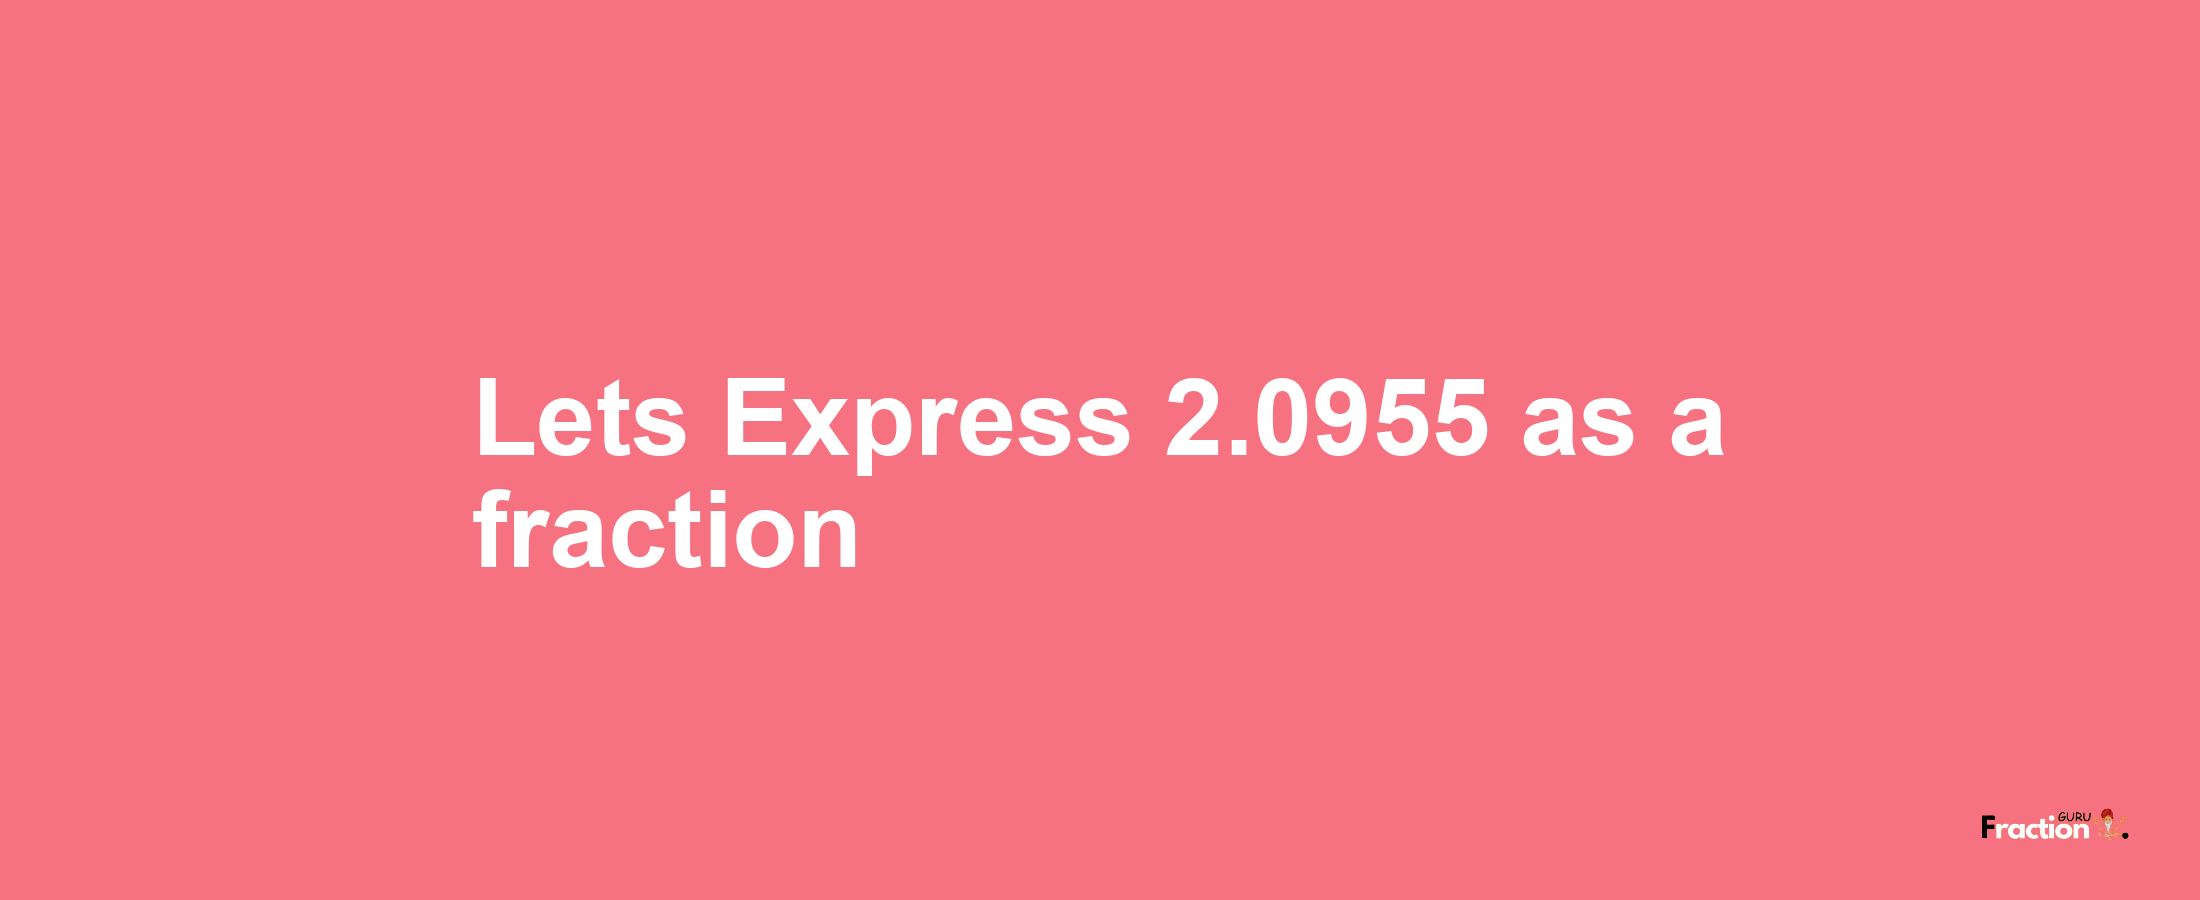 Lets Express 2.0955 as afraction